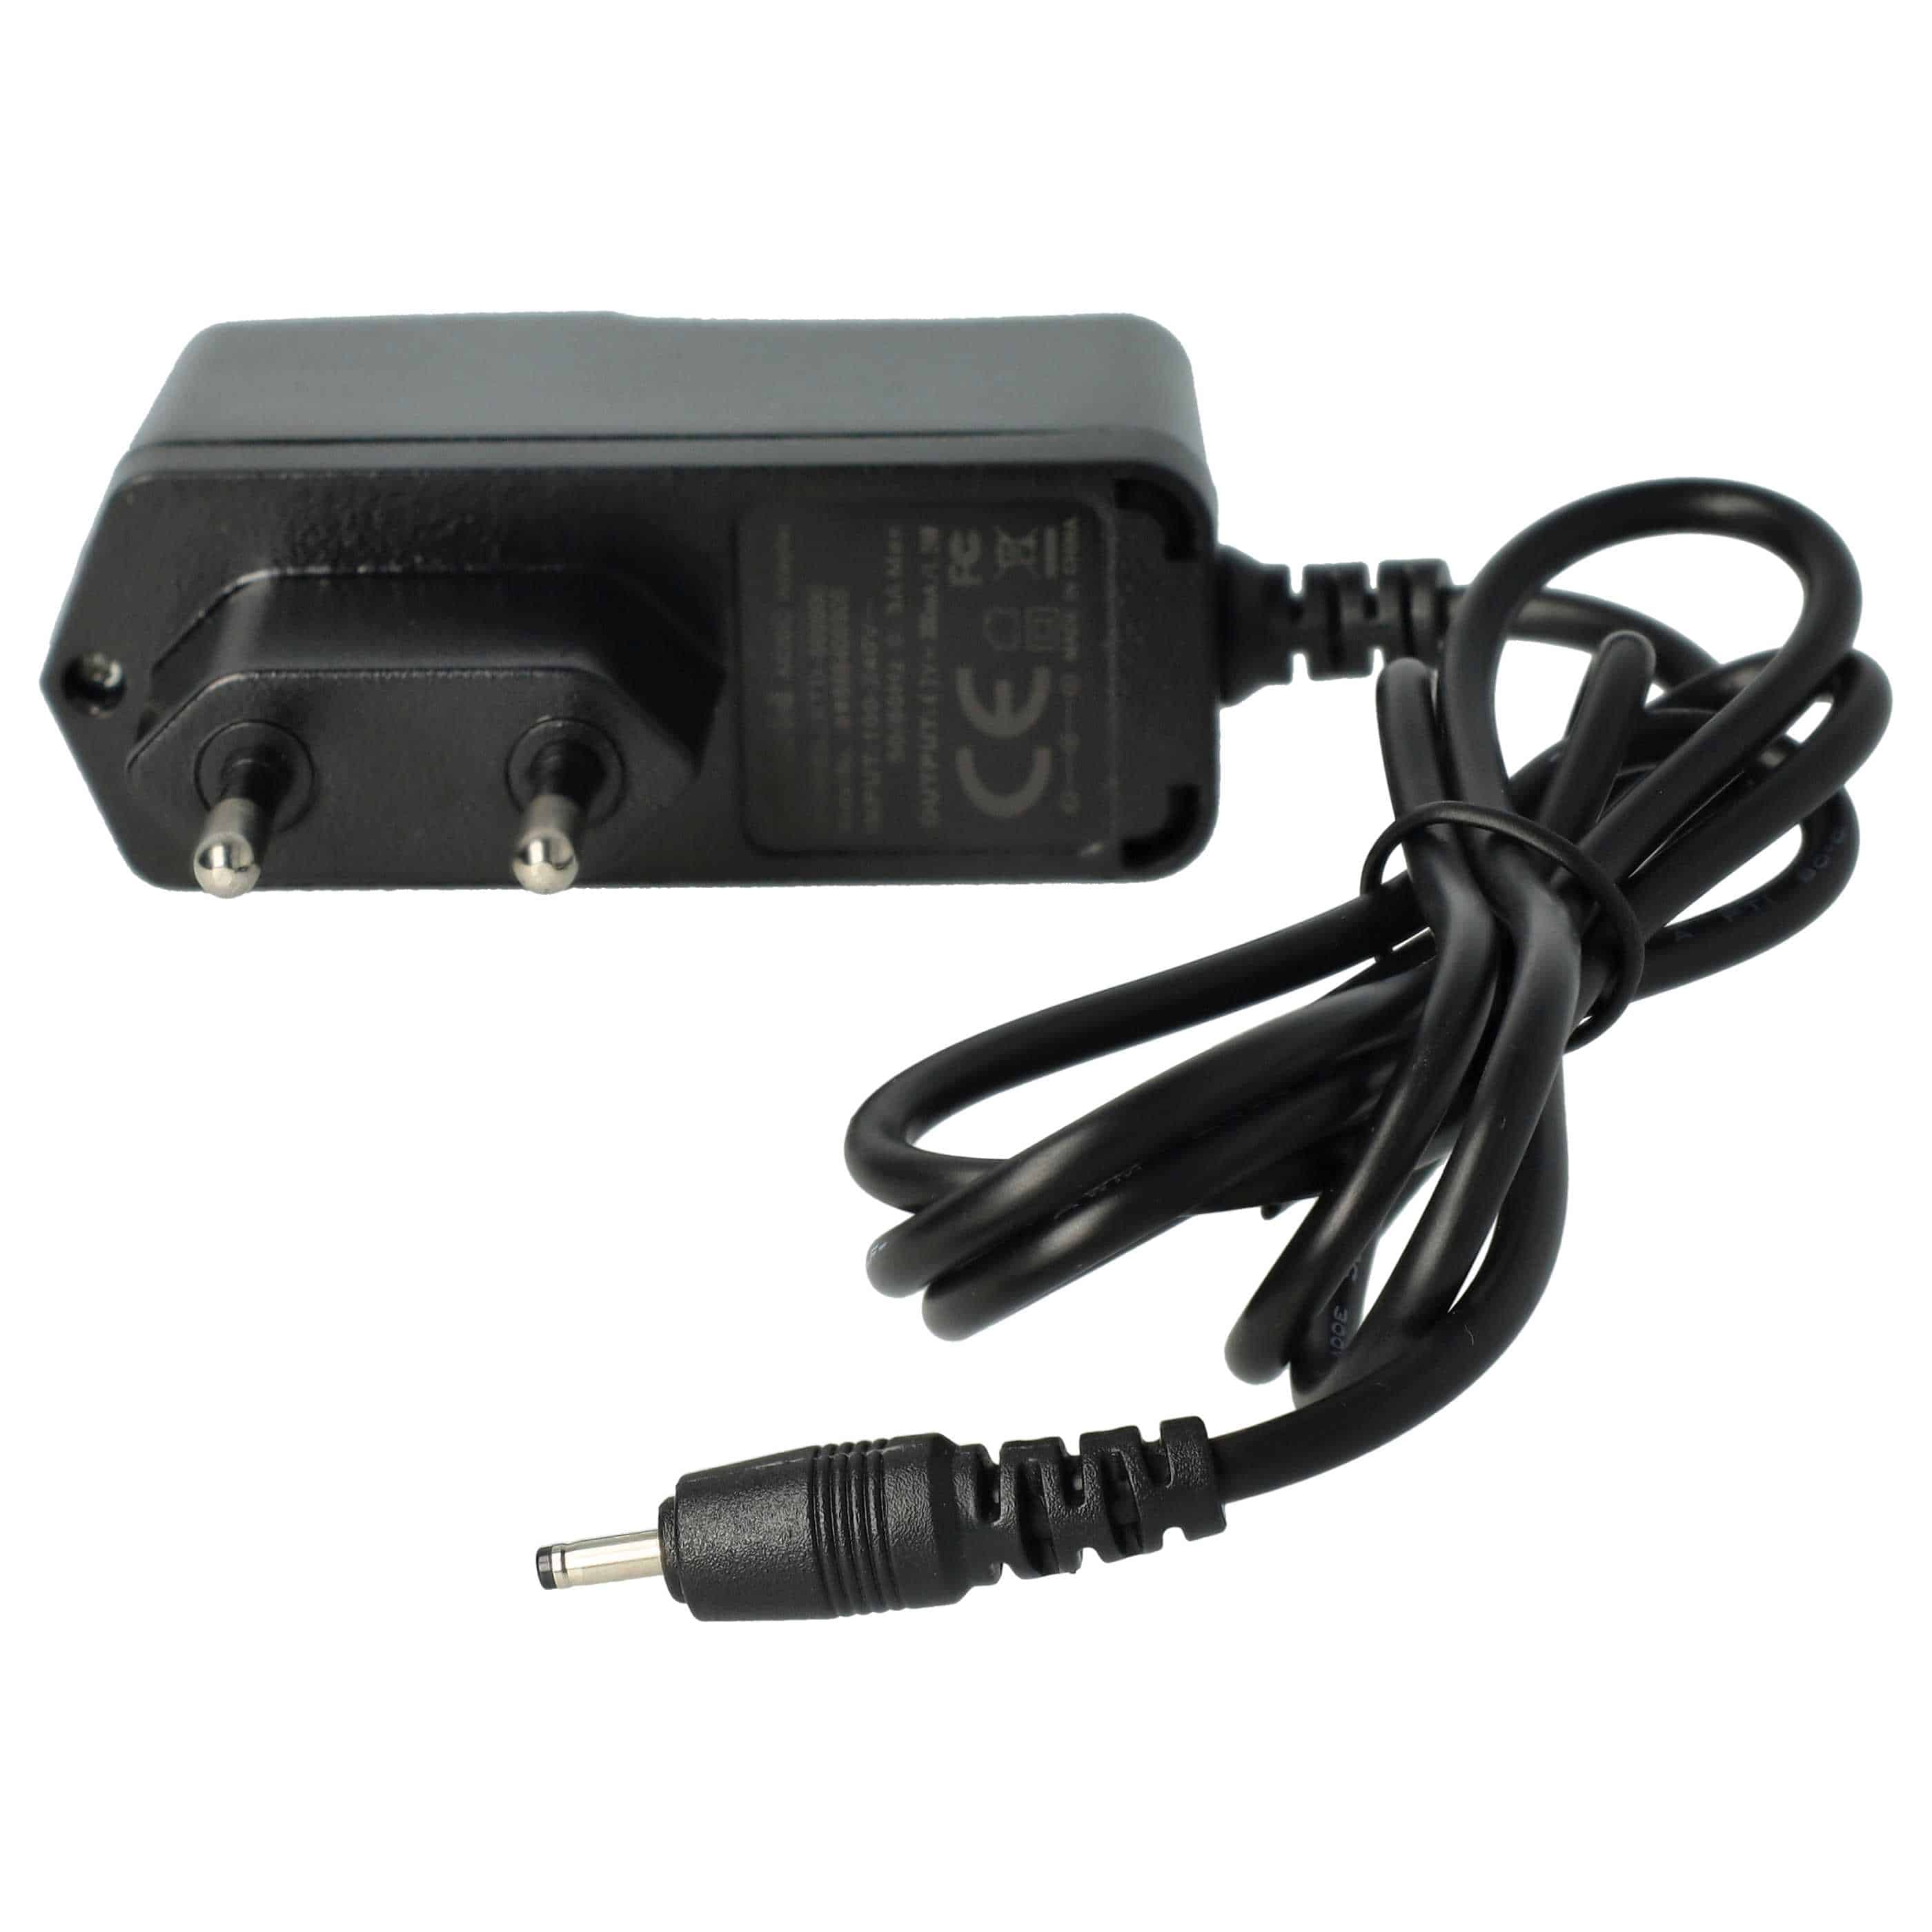 Battery + Charger replaces Gibson GBP-452050, GBP-042030 for Gibson Tuning System - Charging Kit